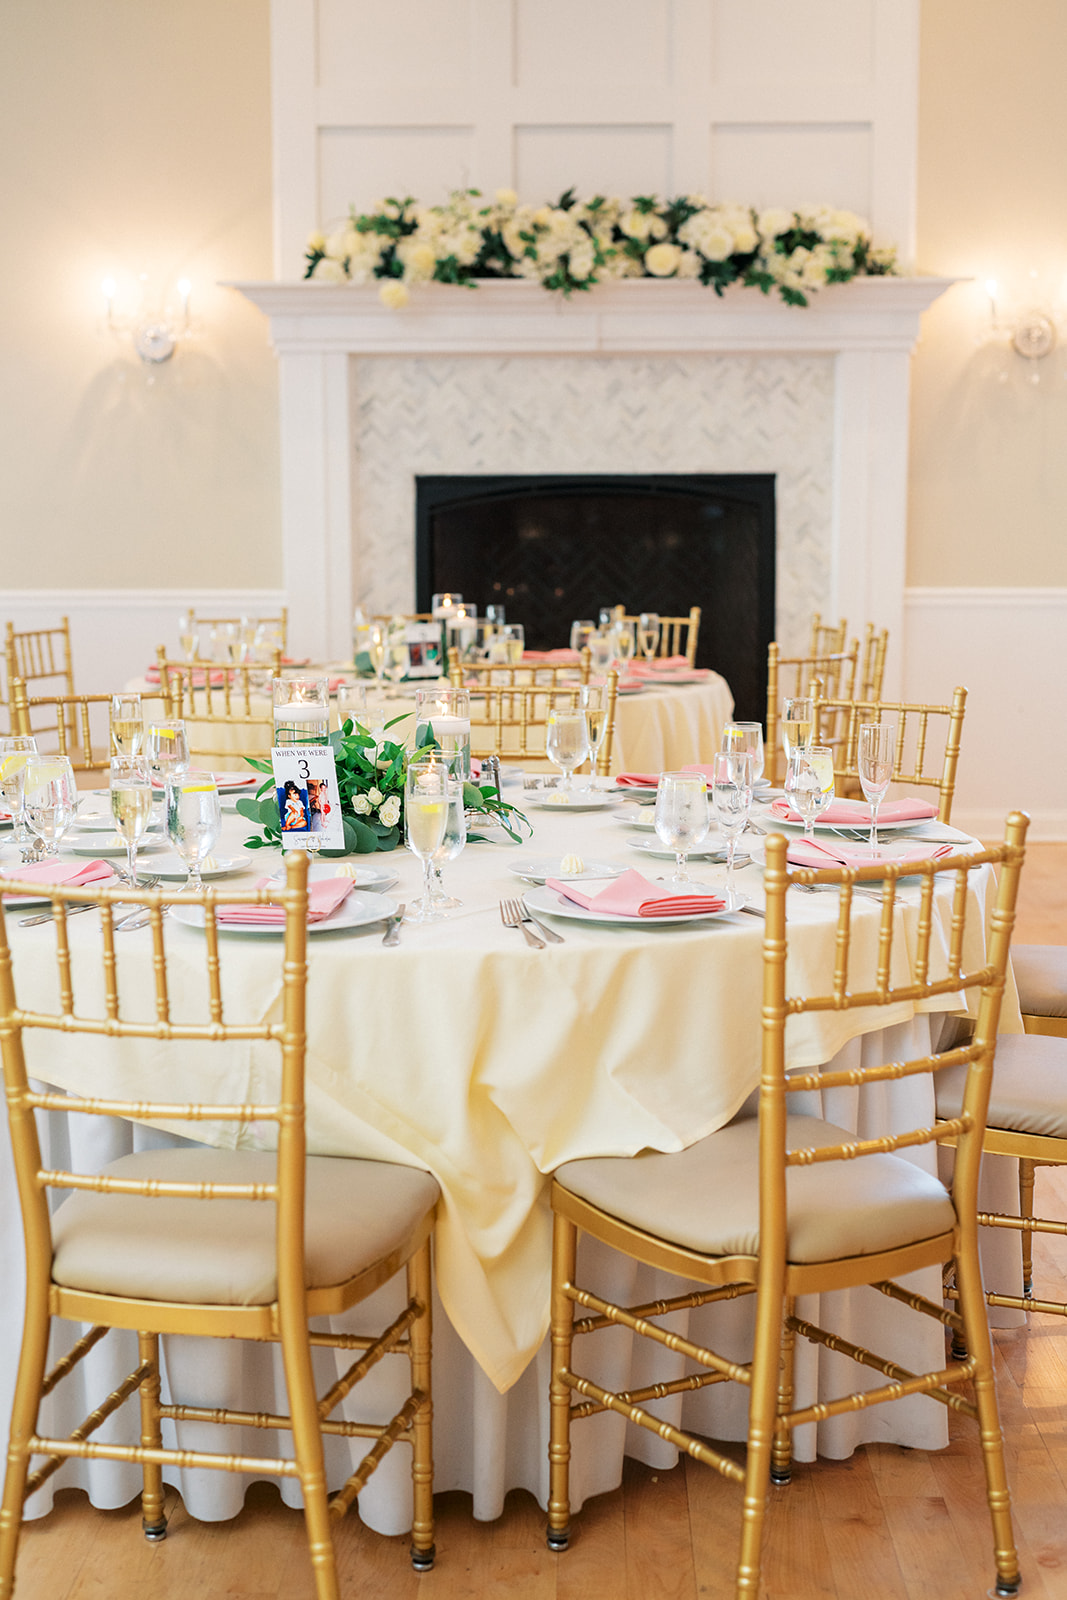 Details of a wedding reception table with gold chairs and pink napkins at the Skyview Golf Club Wedding venue